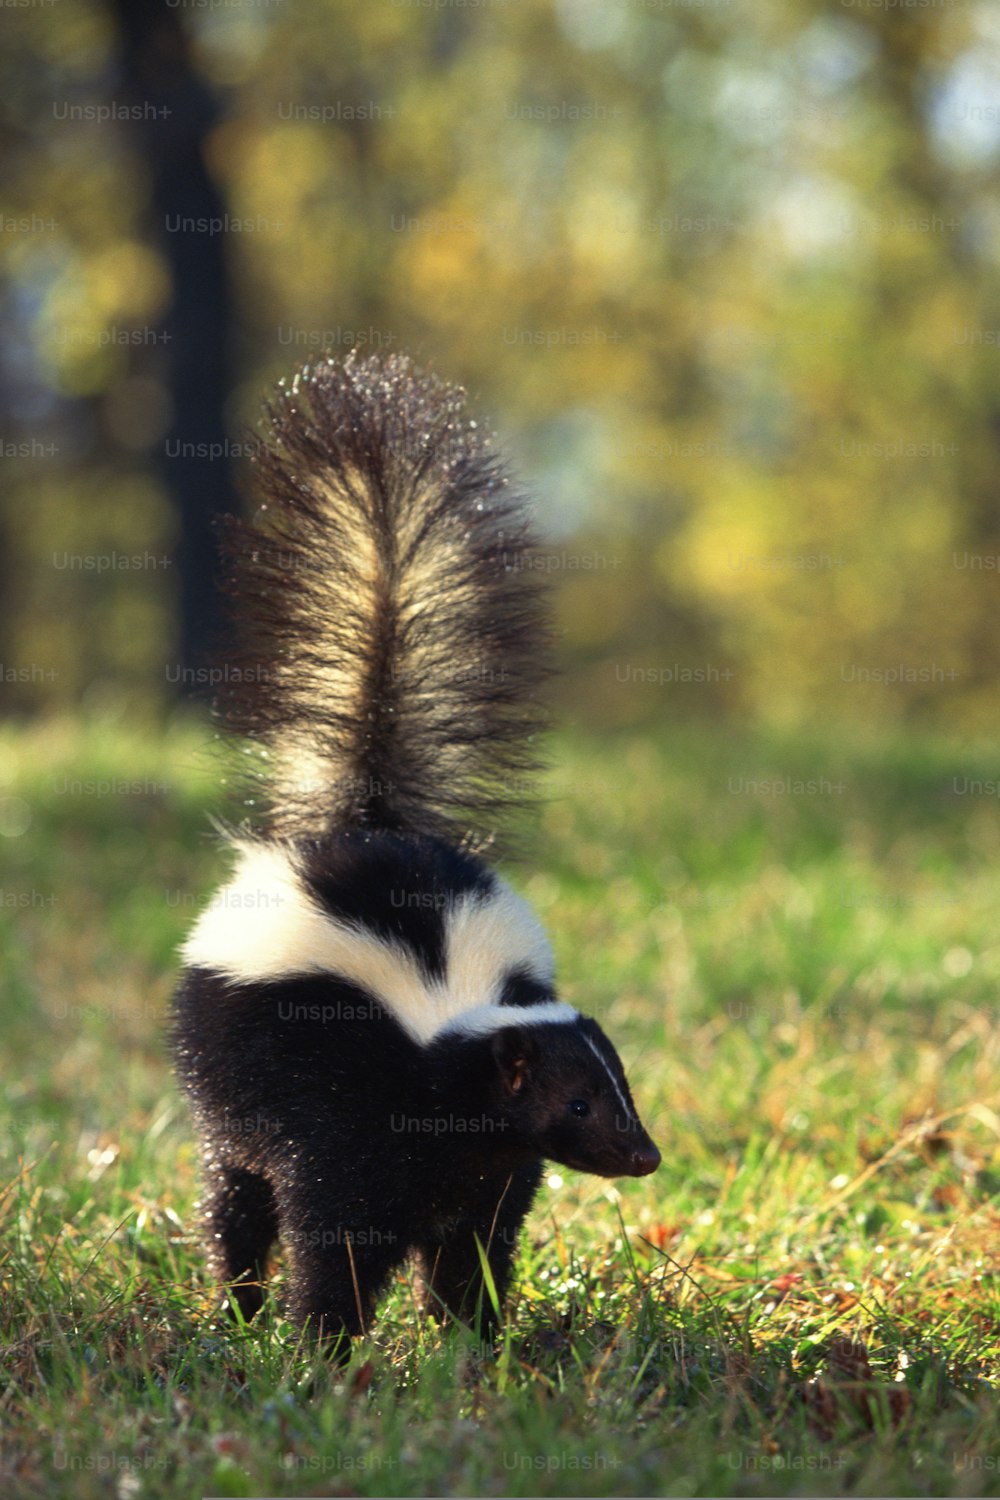 a black and white skunkt walking across a grass covered field